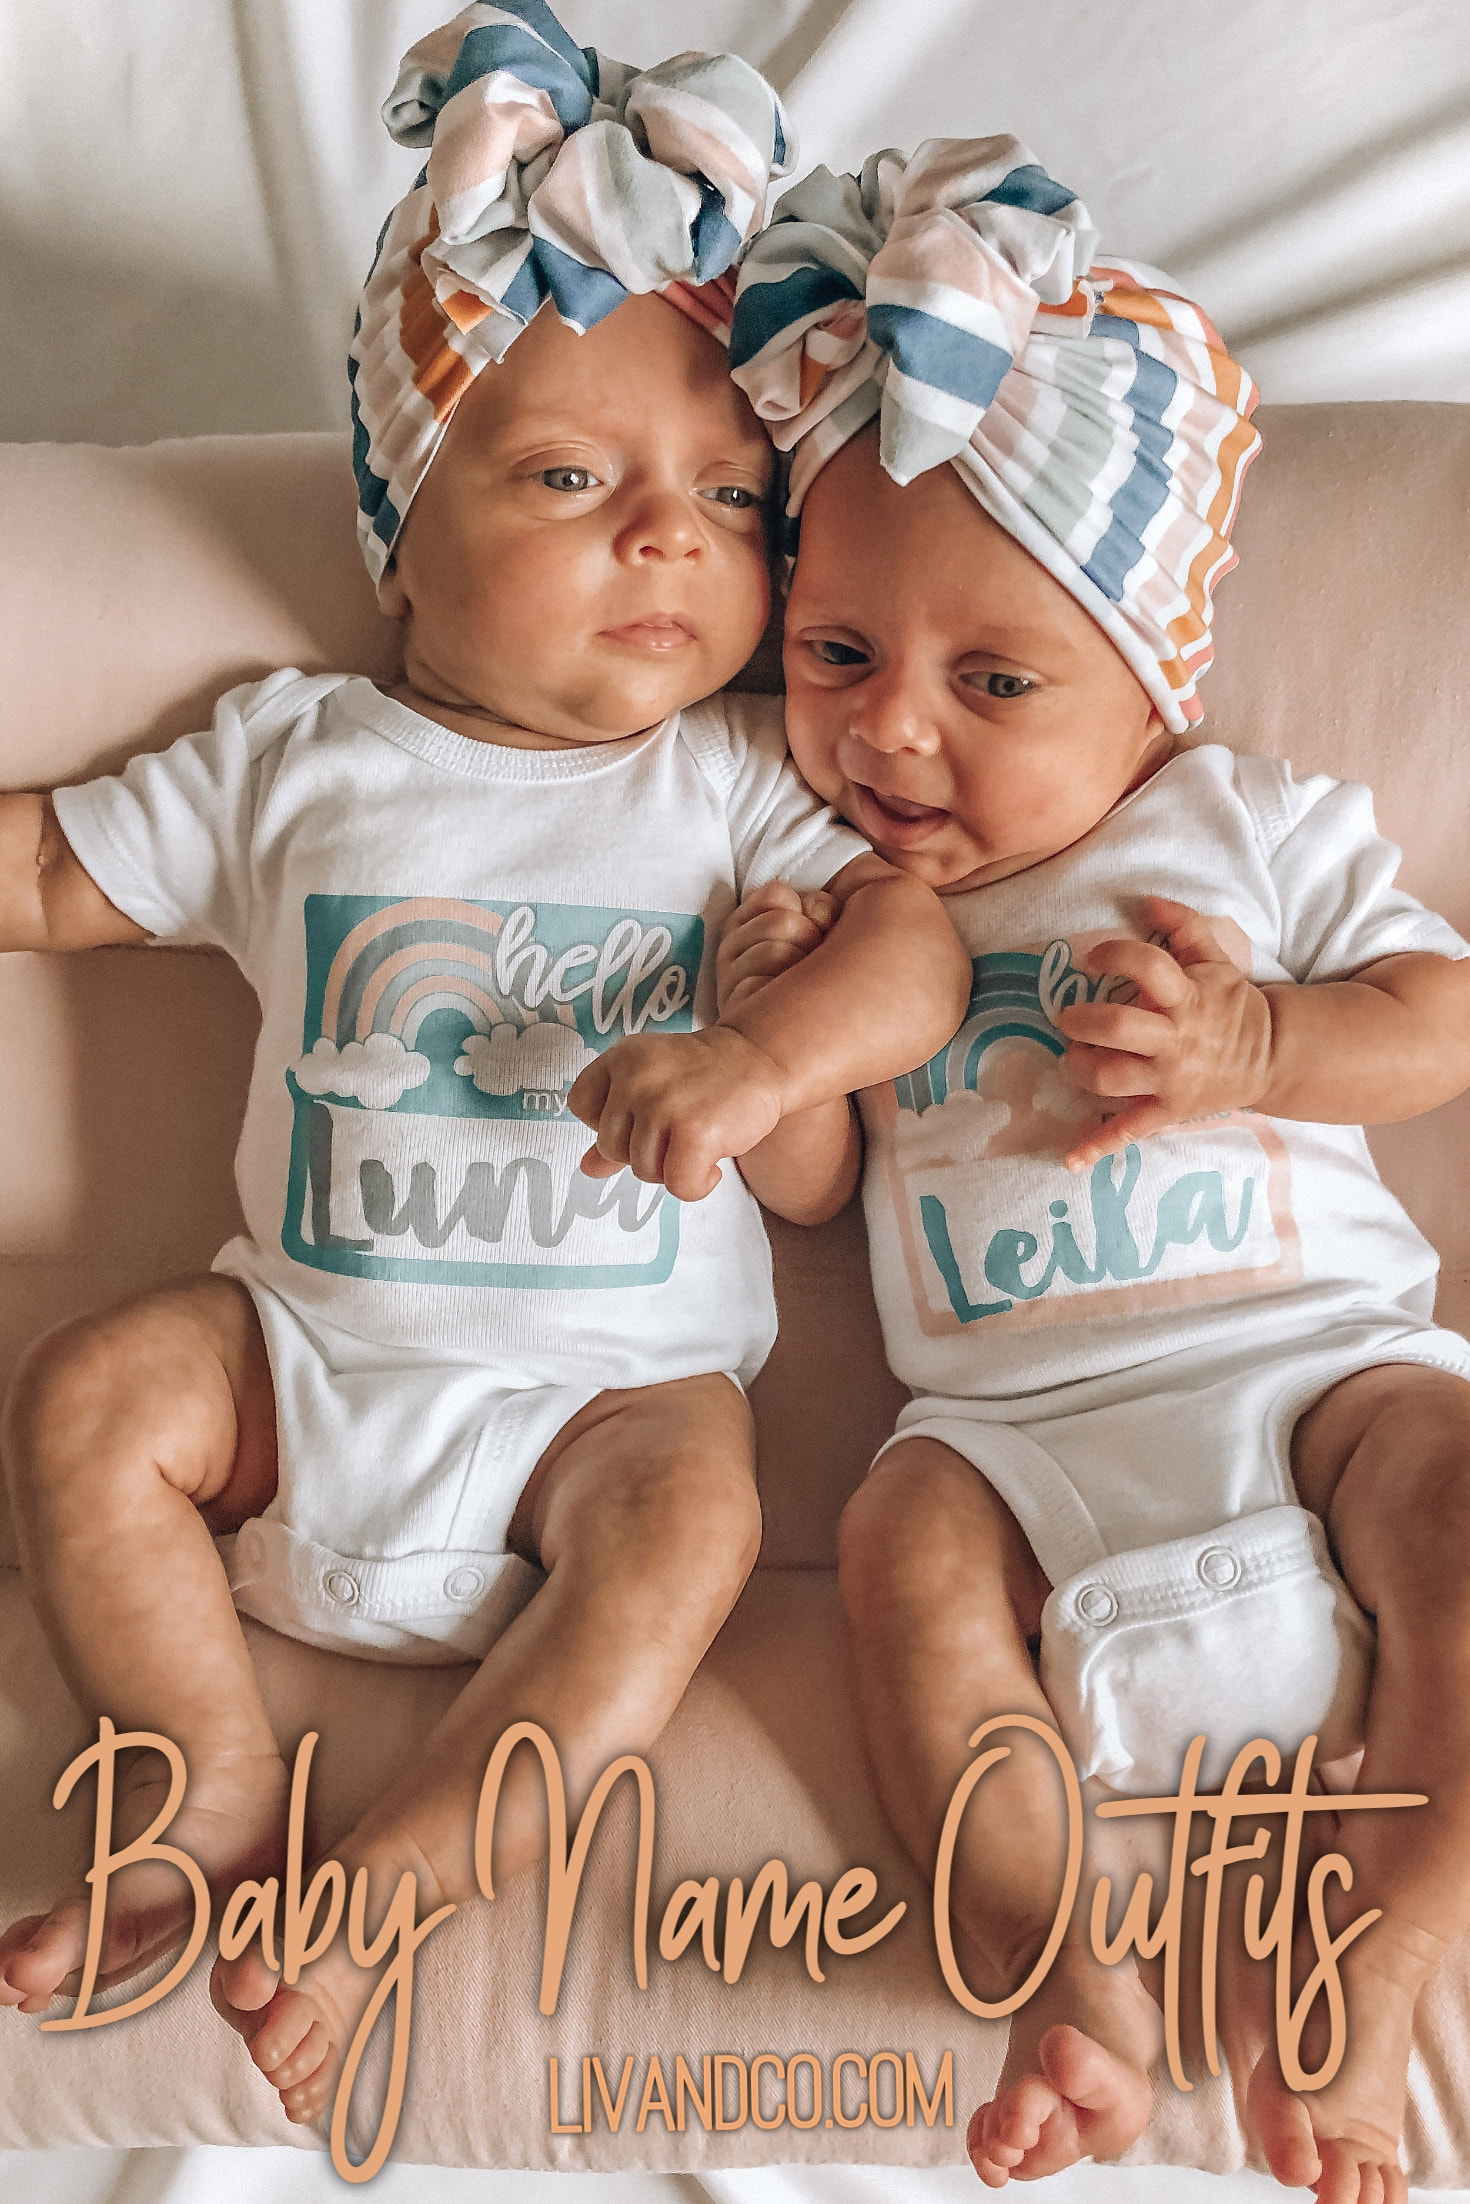 Newborn Photography Outfits, Outfits Bodysuit